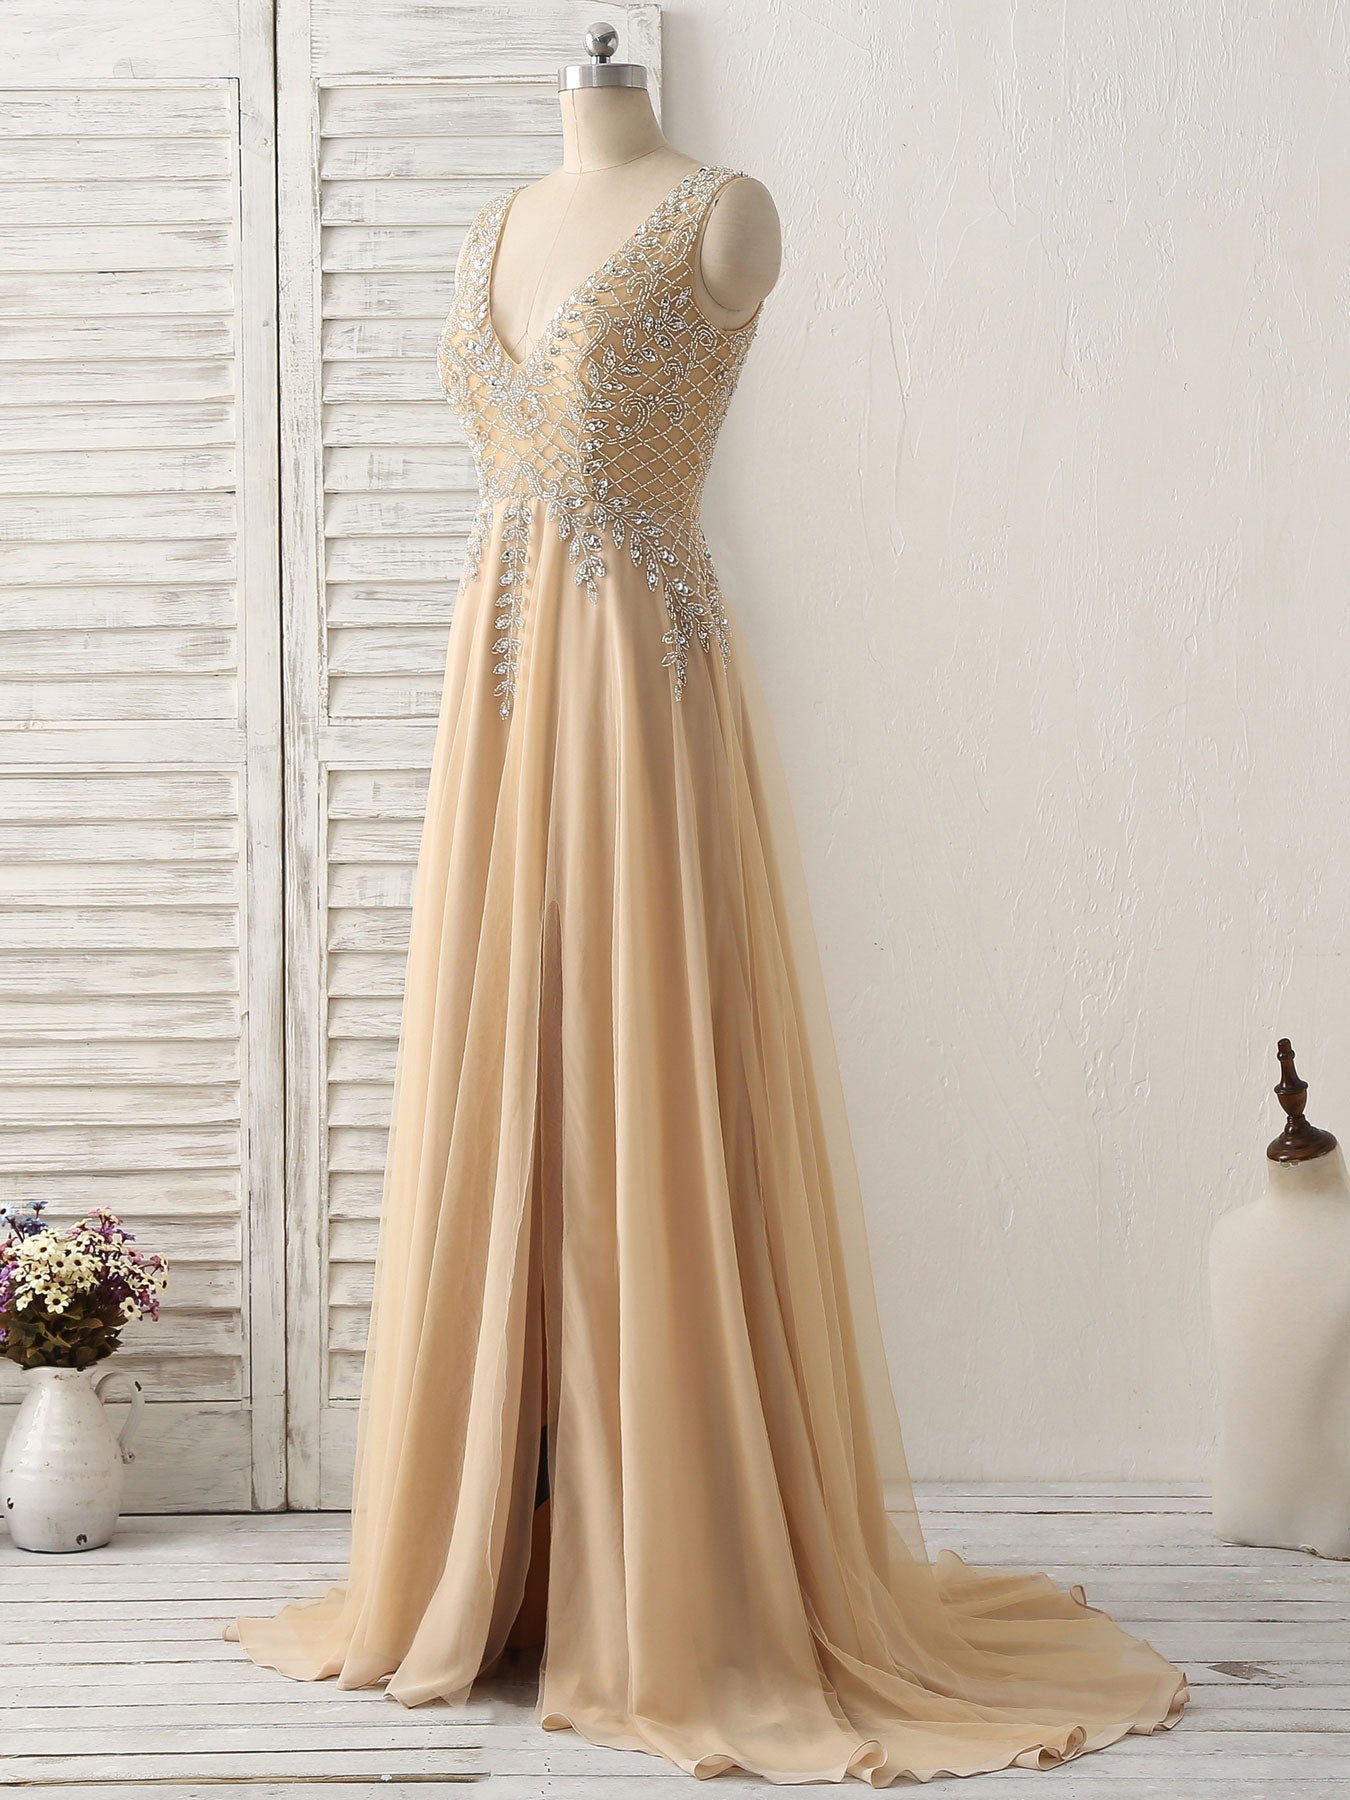 Party Dress Short Tight, Champagne V Neck Beads Long Prom Dress Tulle Evening Dress